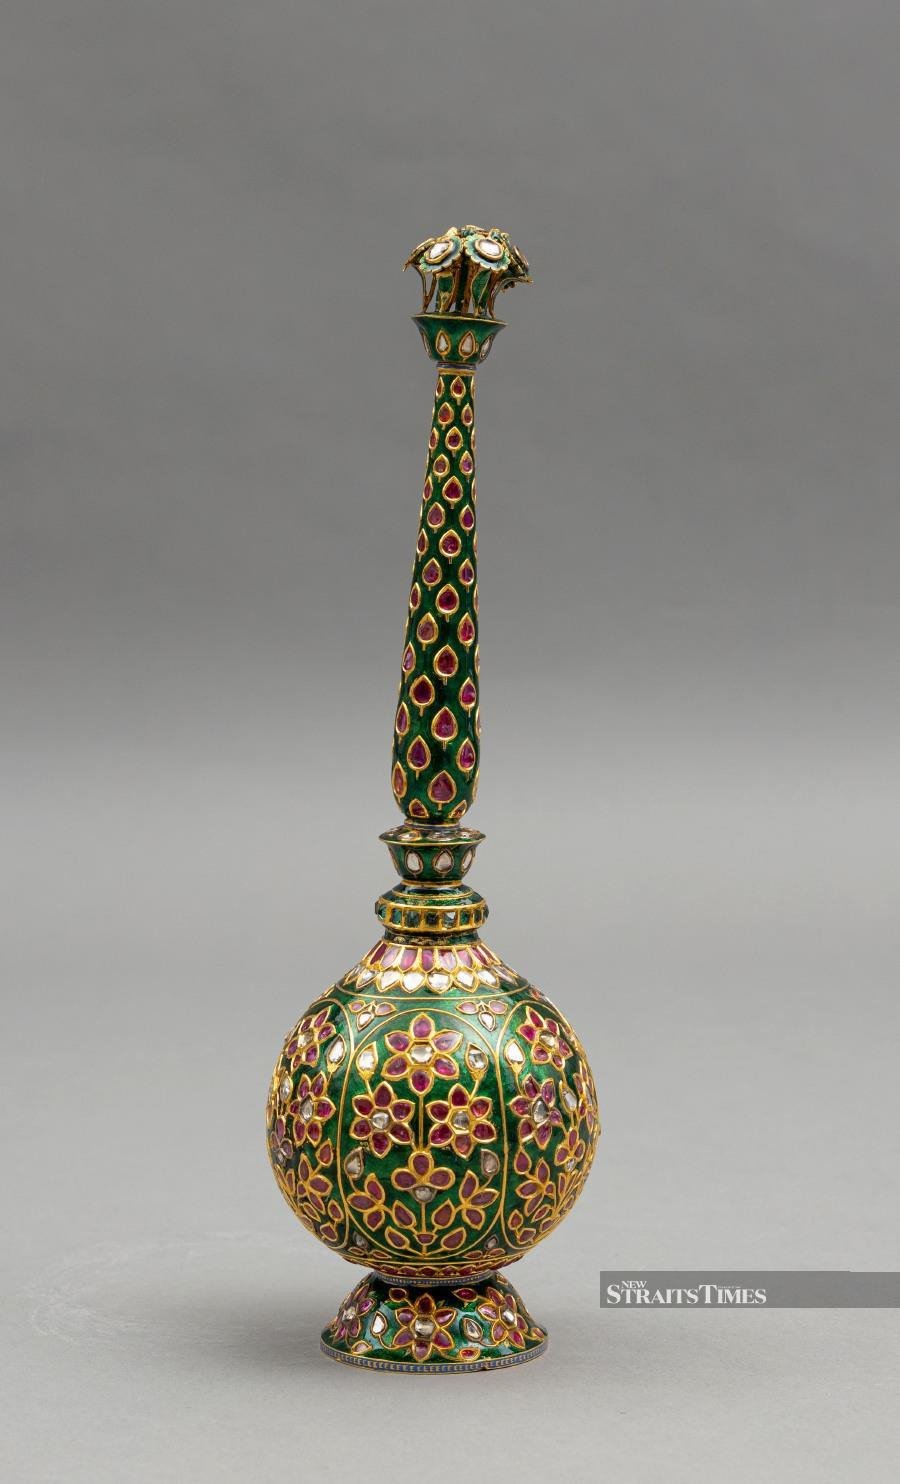  Rarely have rosewater sprinklers been as lavish as this 18th-century example in enamel with gemstones. Courtesy of Islamic Arts Museum Malaysia.